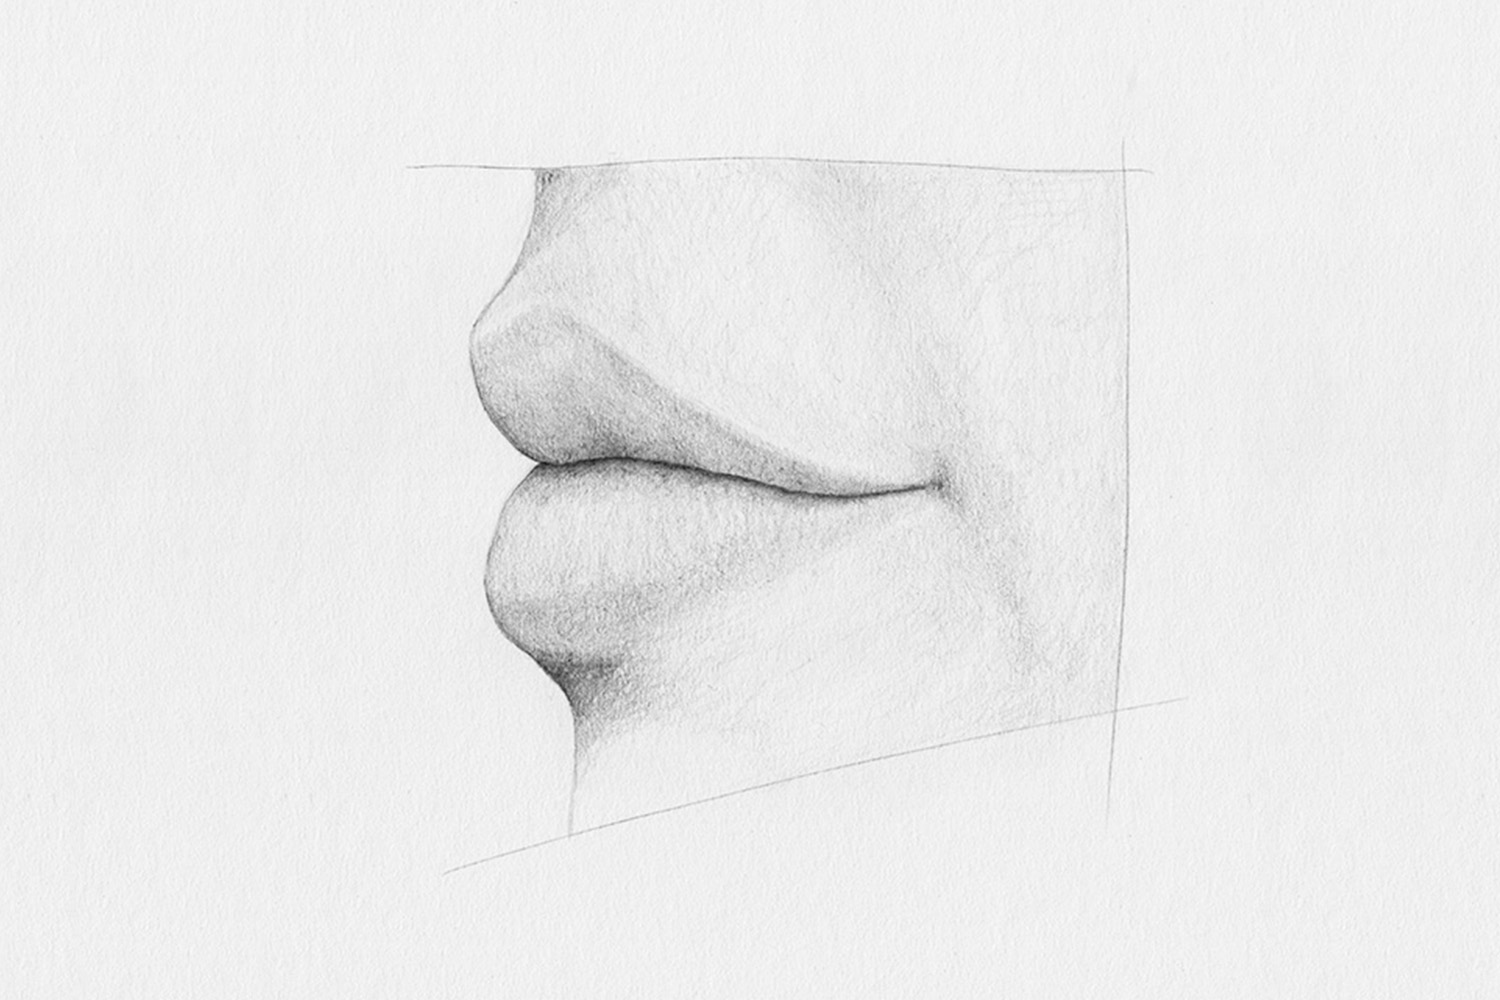 How to Draw Lips from the Side